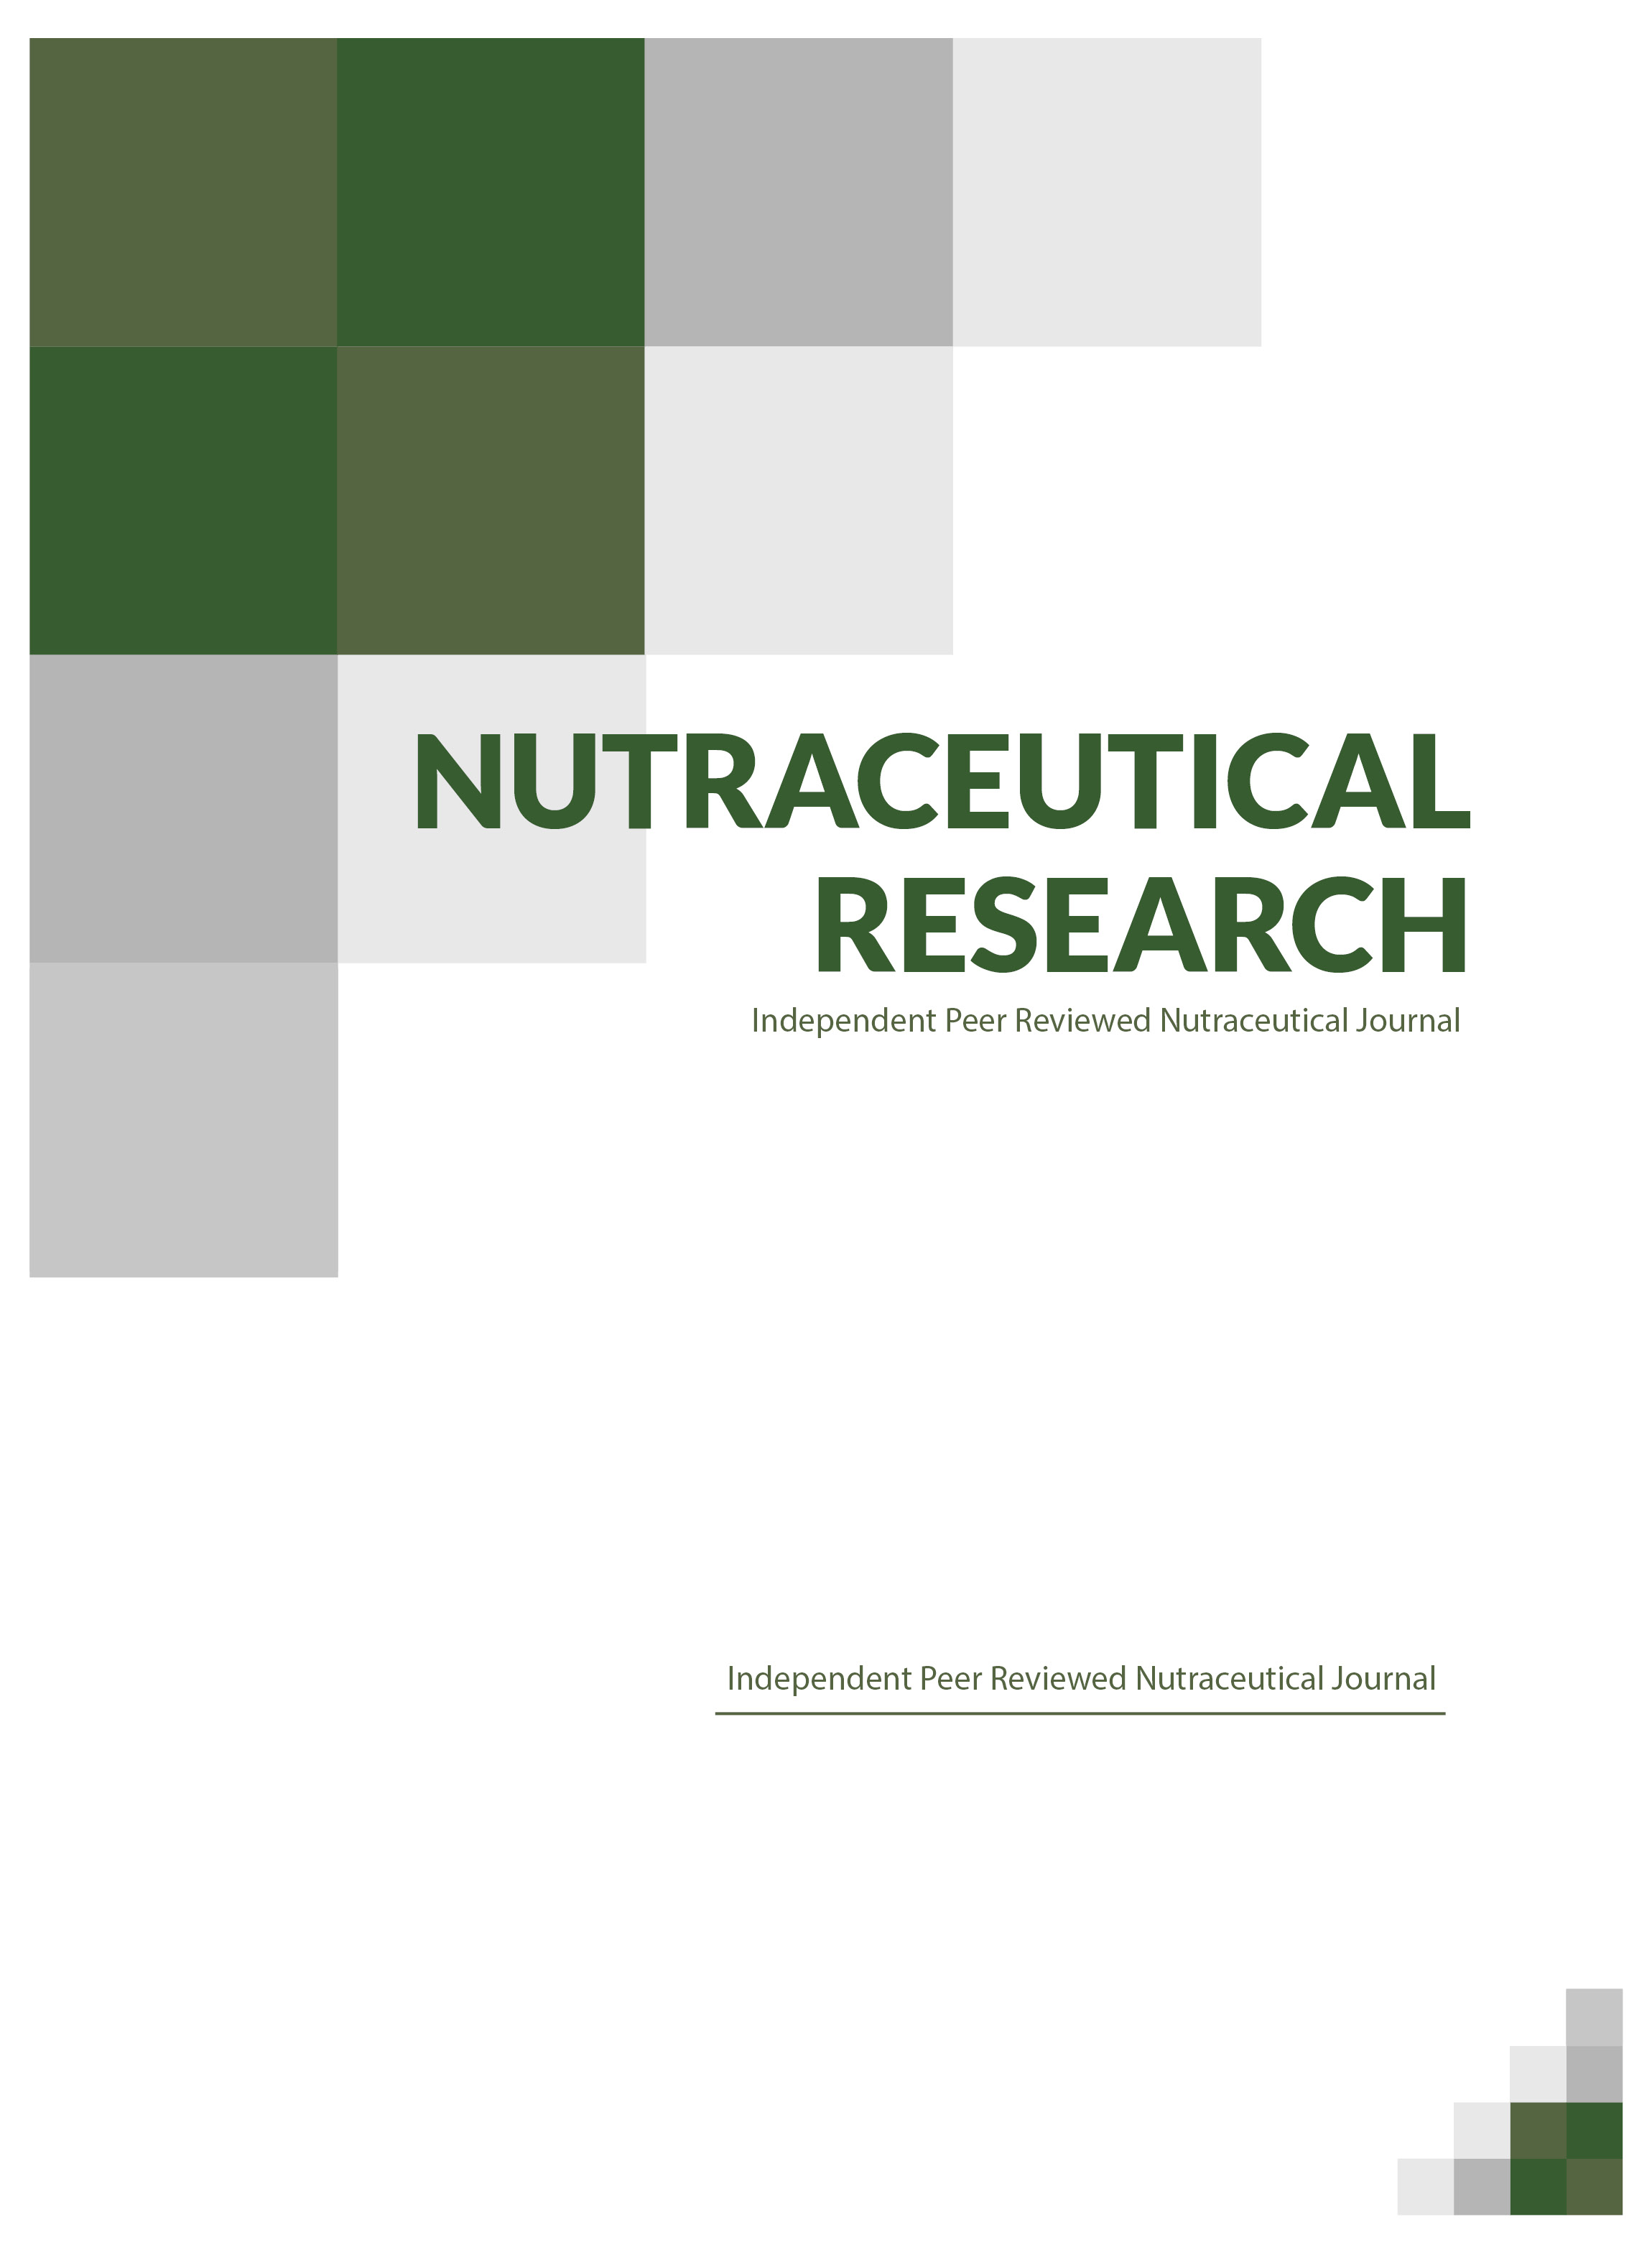 Nutraceutical Research